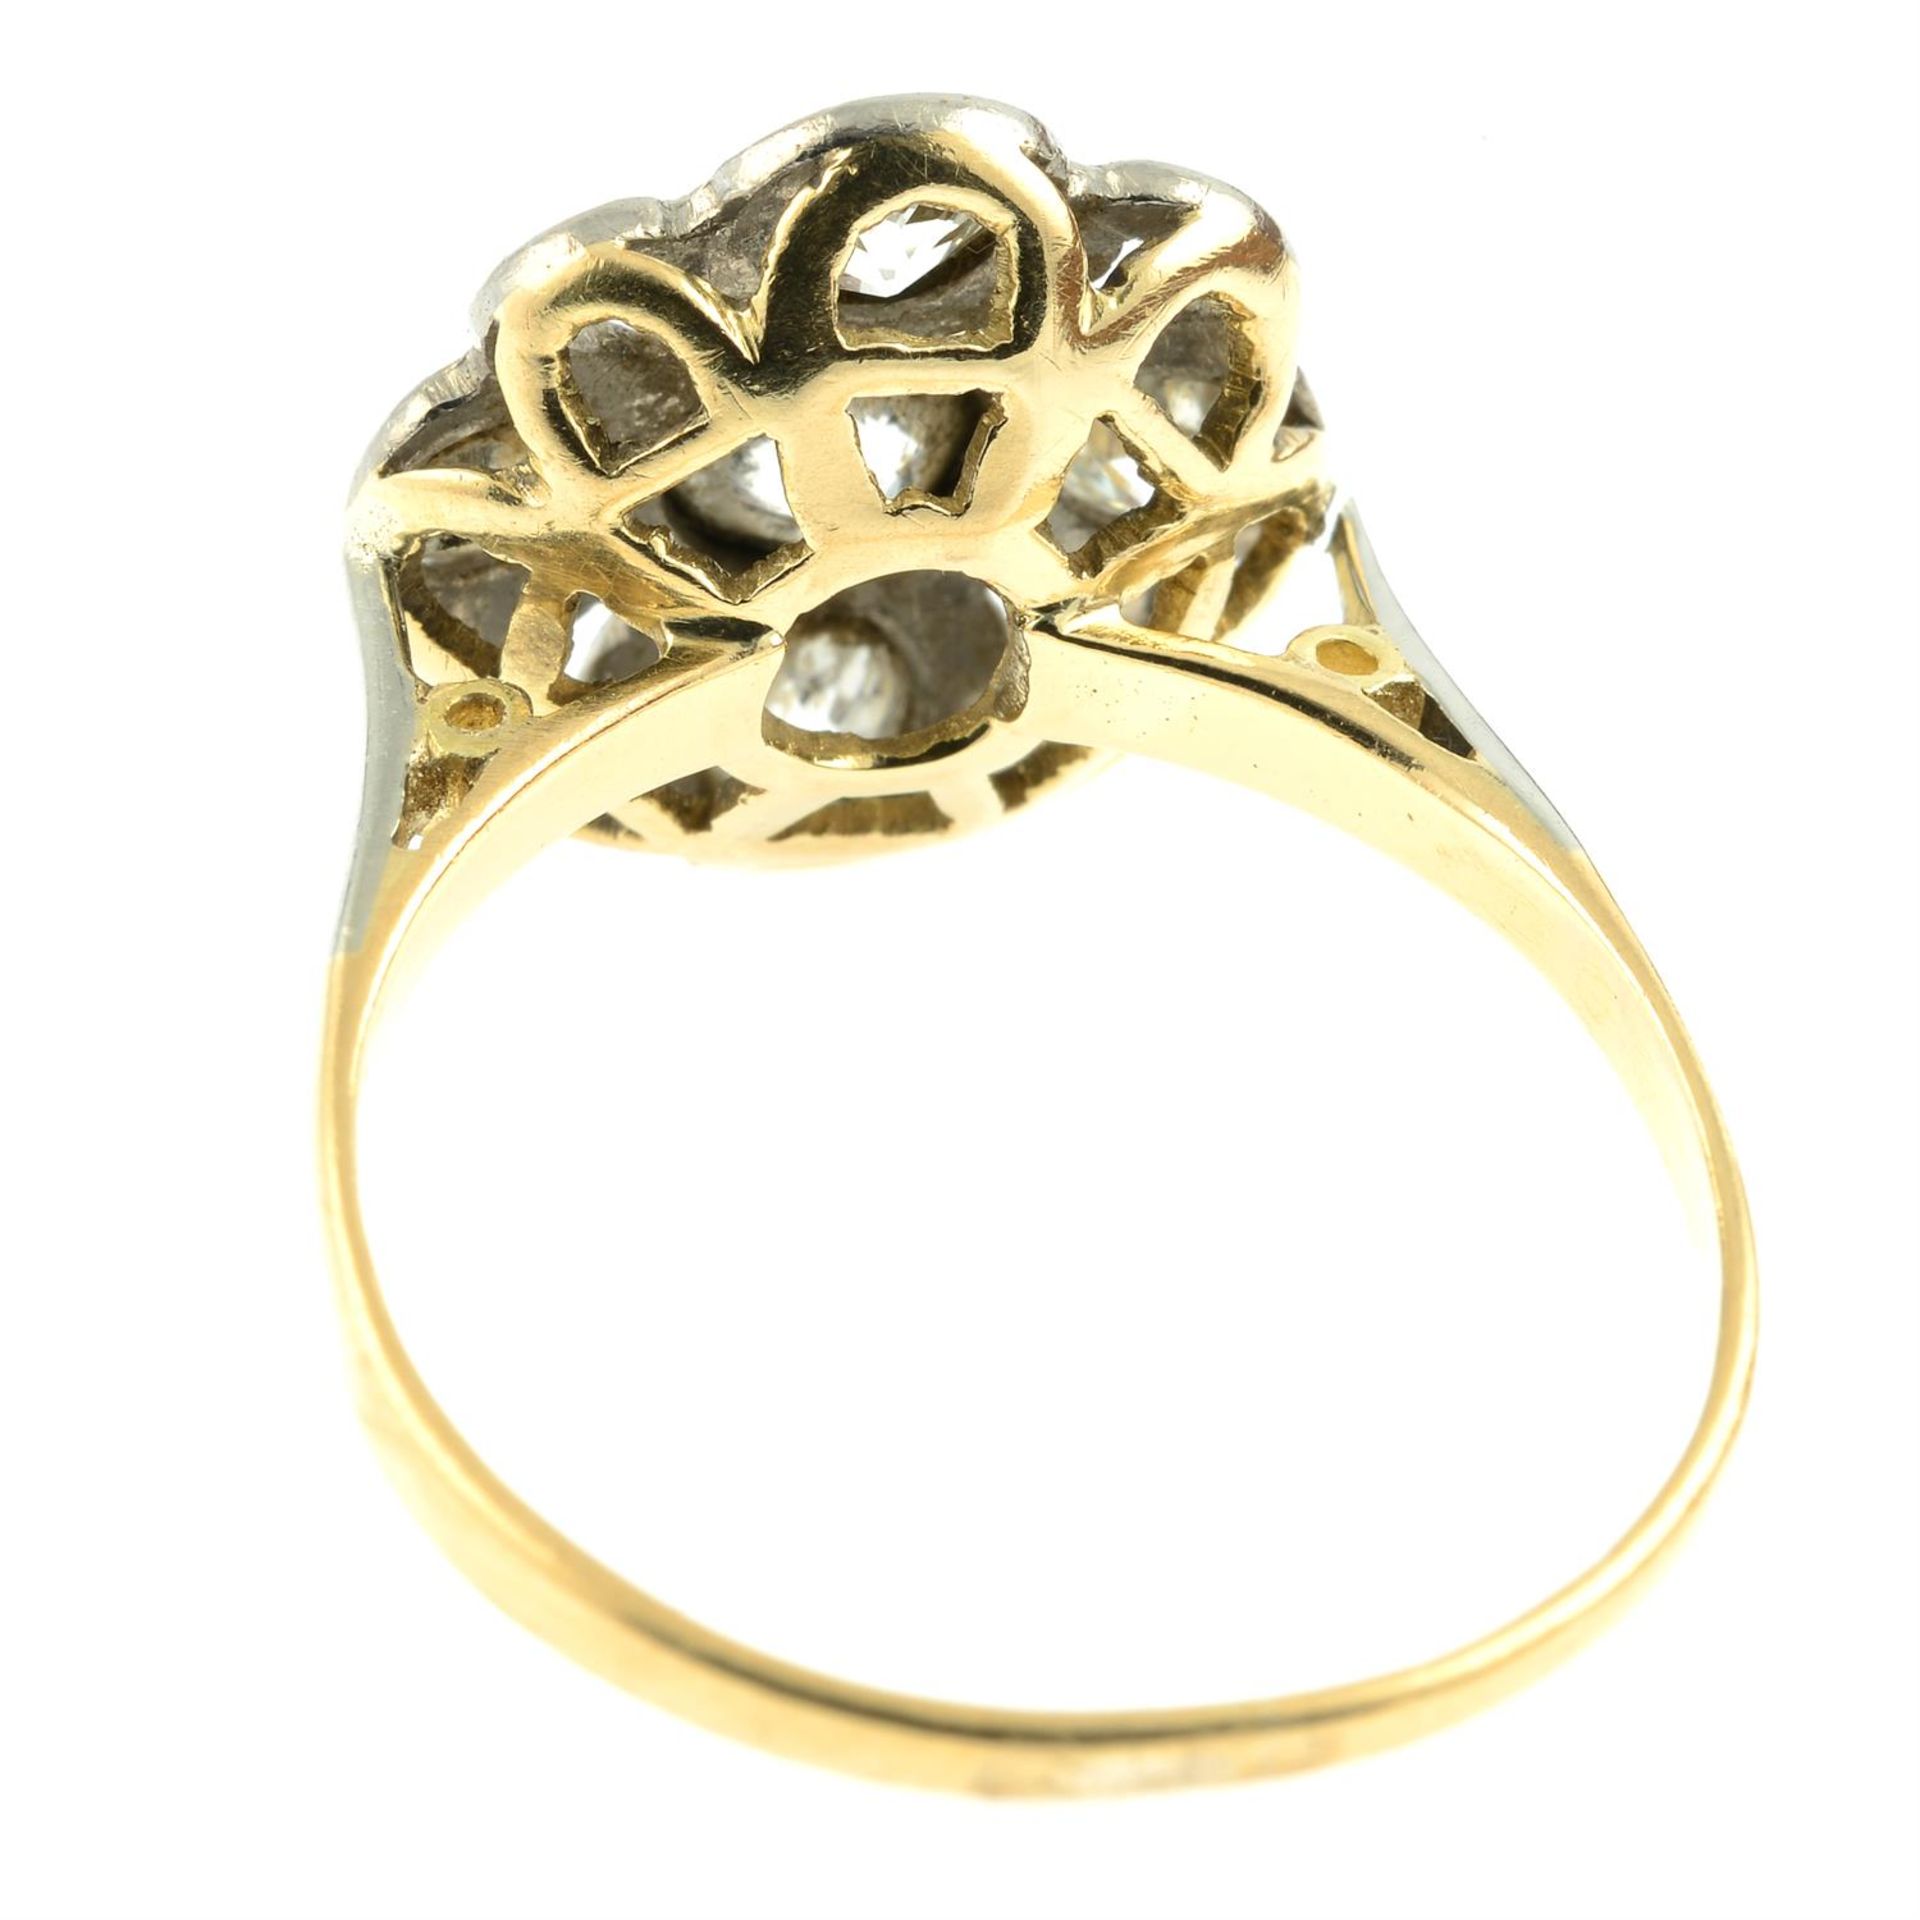 An early to mid 20th century platinum and 18ct gold old-cut diamond floral dress ring. - Image 4 of 5